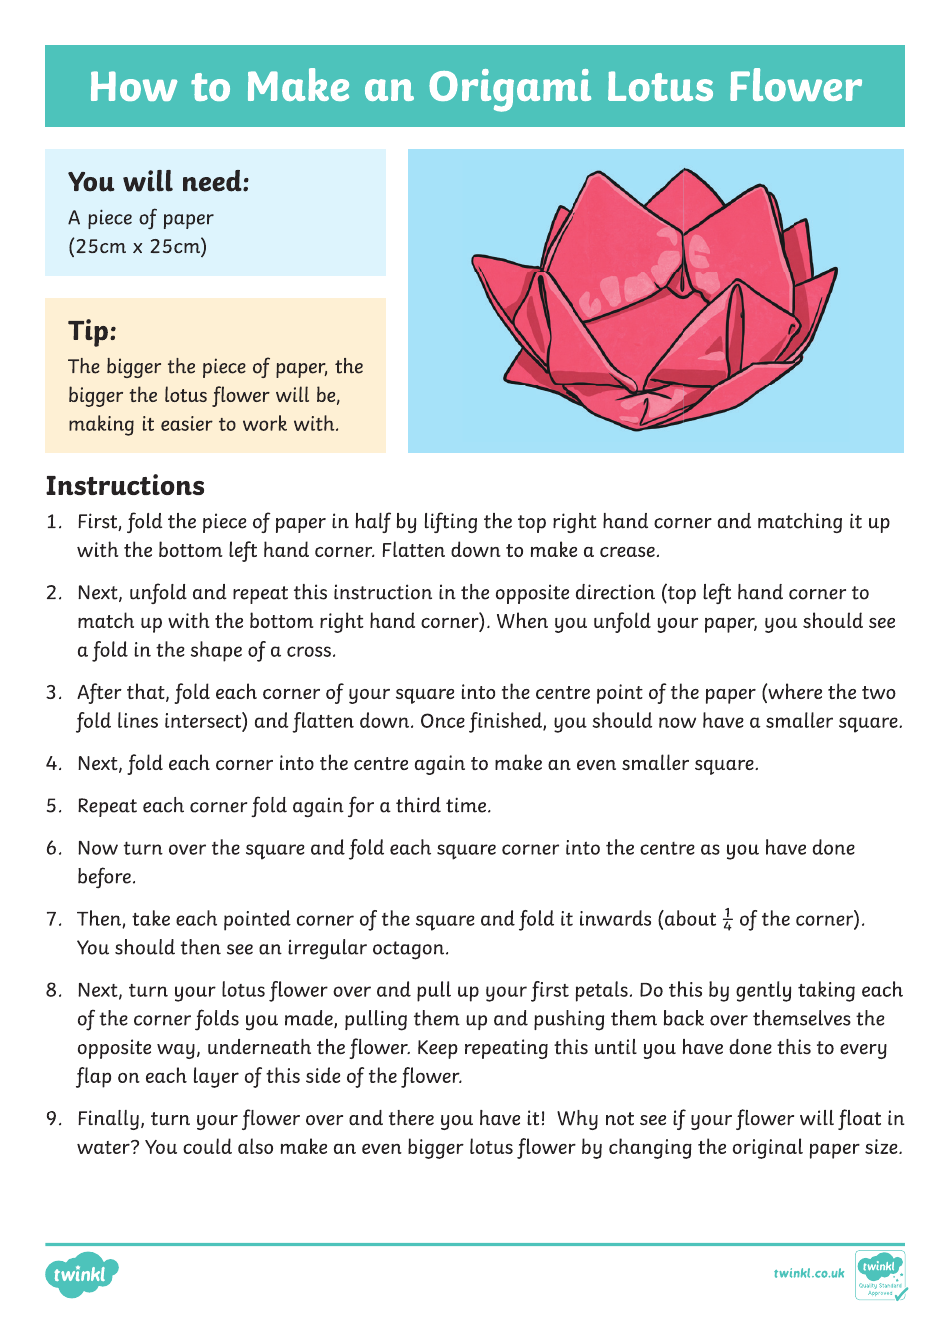 Origami Lotus Flower Guide, Page 1